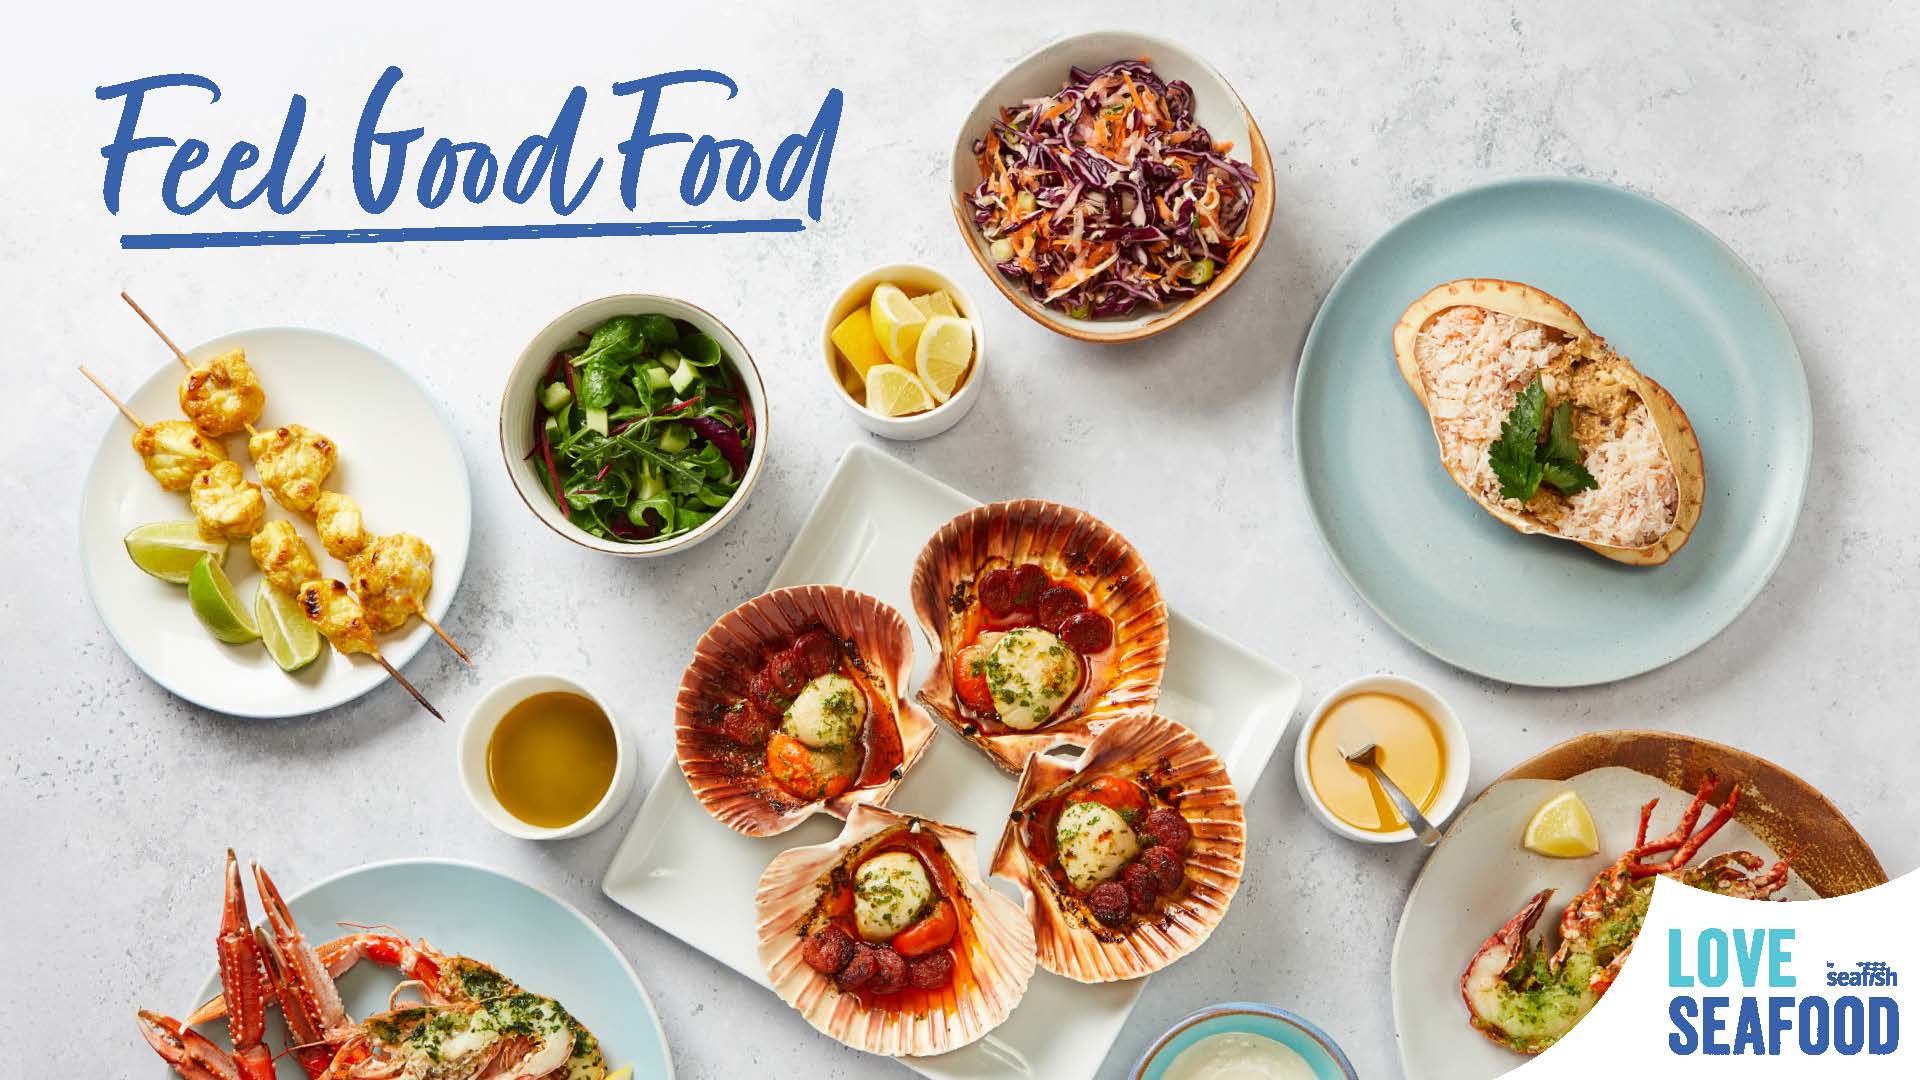 Love seafood campaign graphic, features variety of fish and shellfish dishes with text 'Feel Good Food'